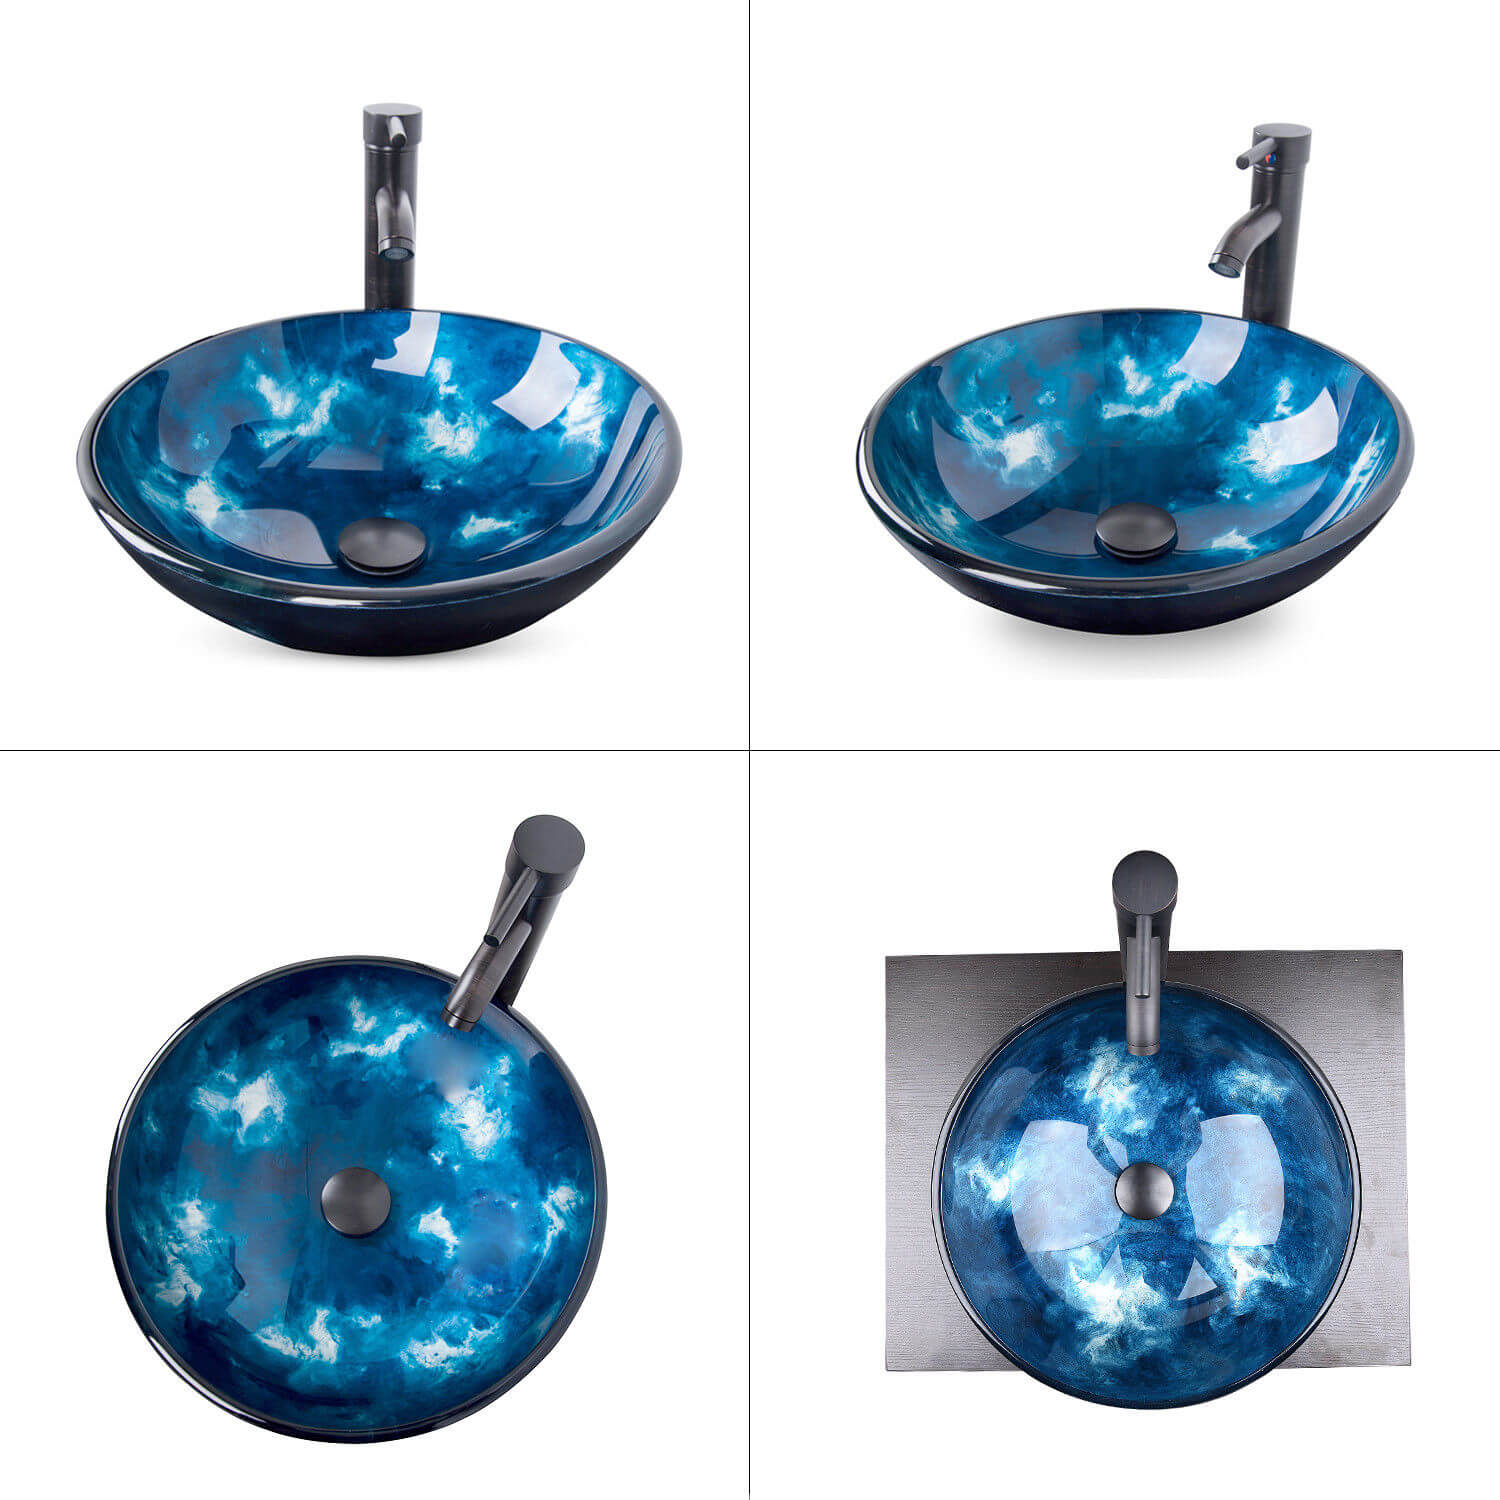 4 angle views of Elecwish ocean blue glass sink